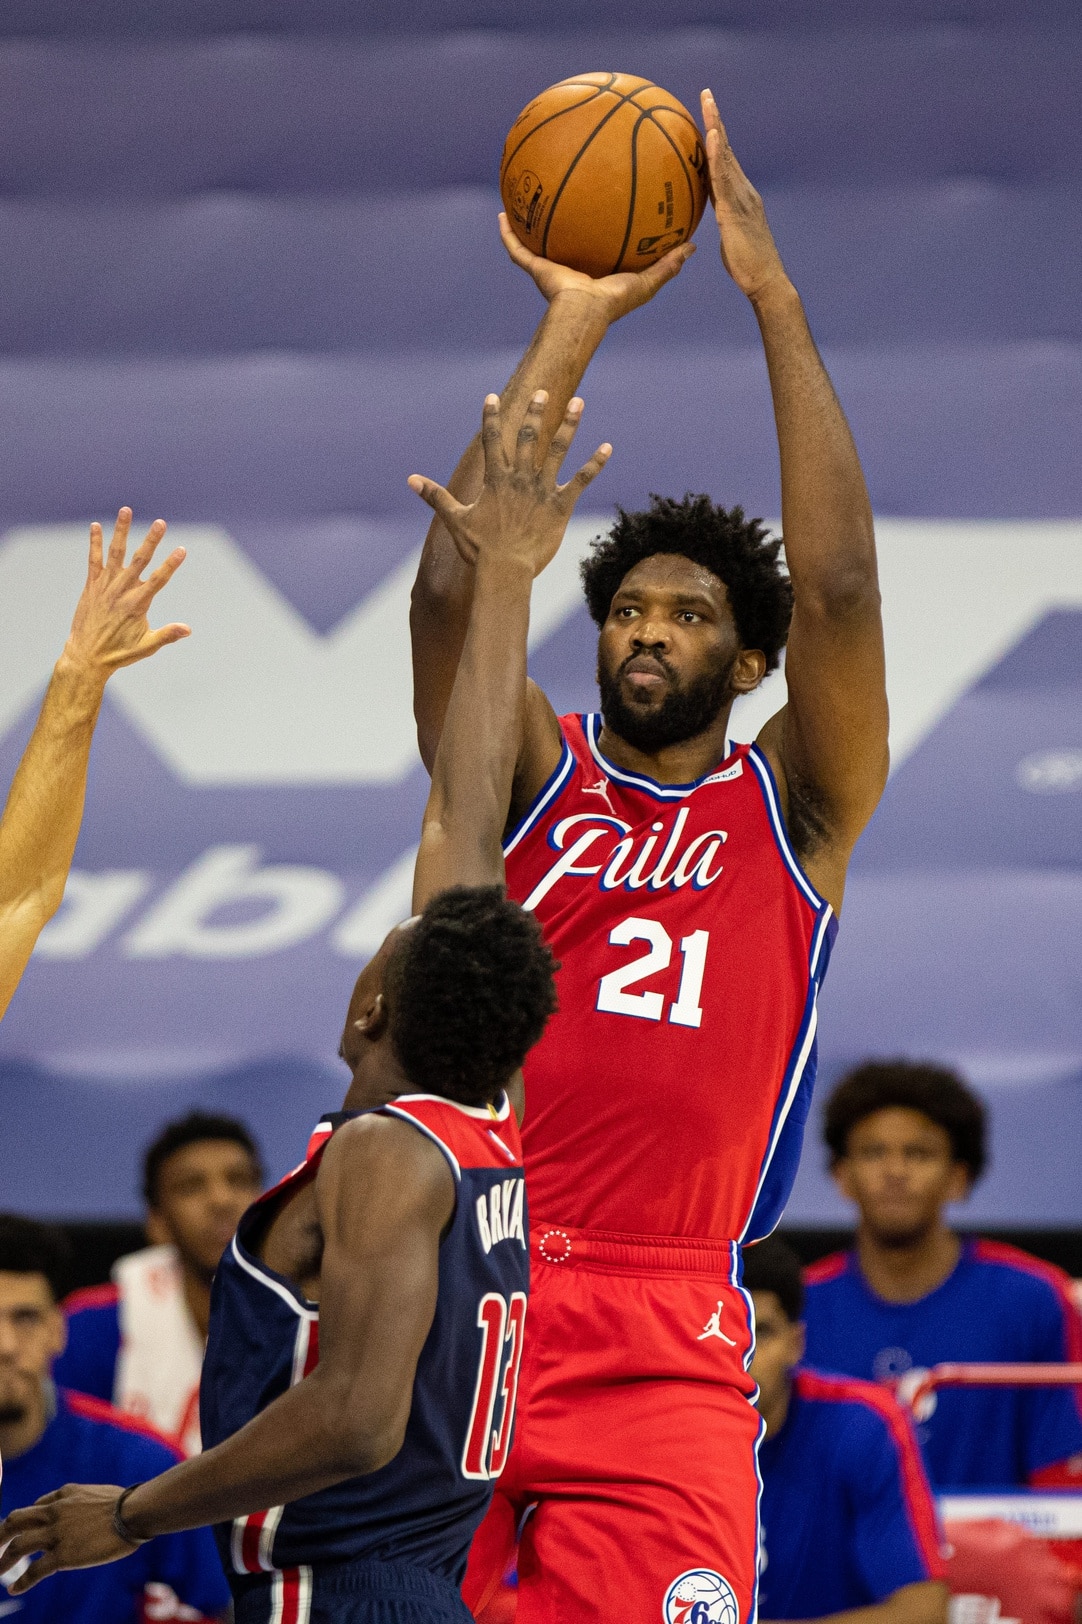 Sixers vs. Heat Betting Preview (January 14, 2021)